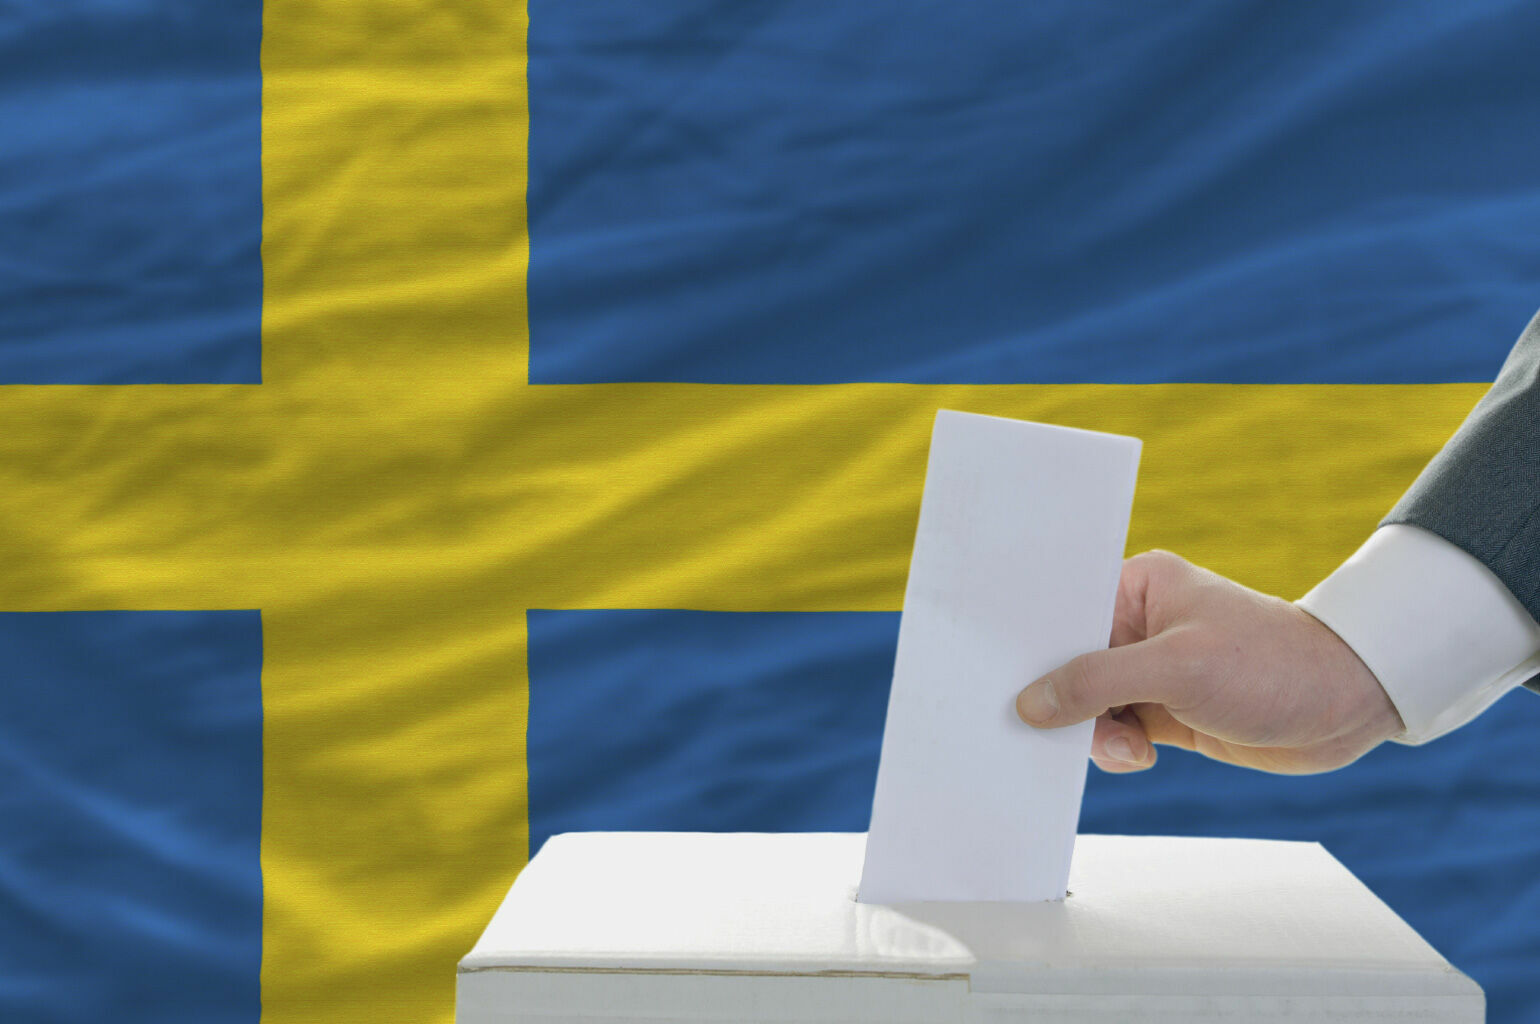 Let's make Sweden great again! Right-wingers win elections in this country